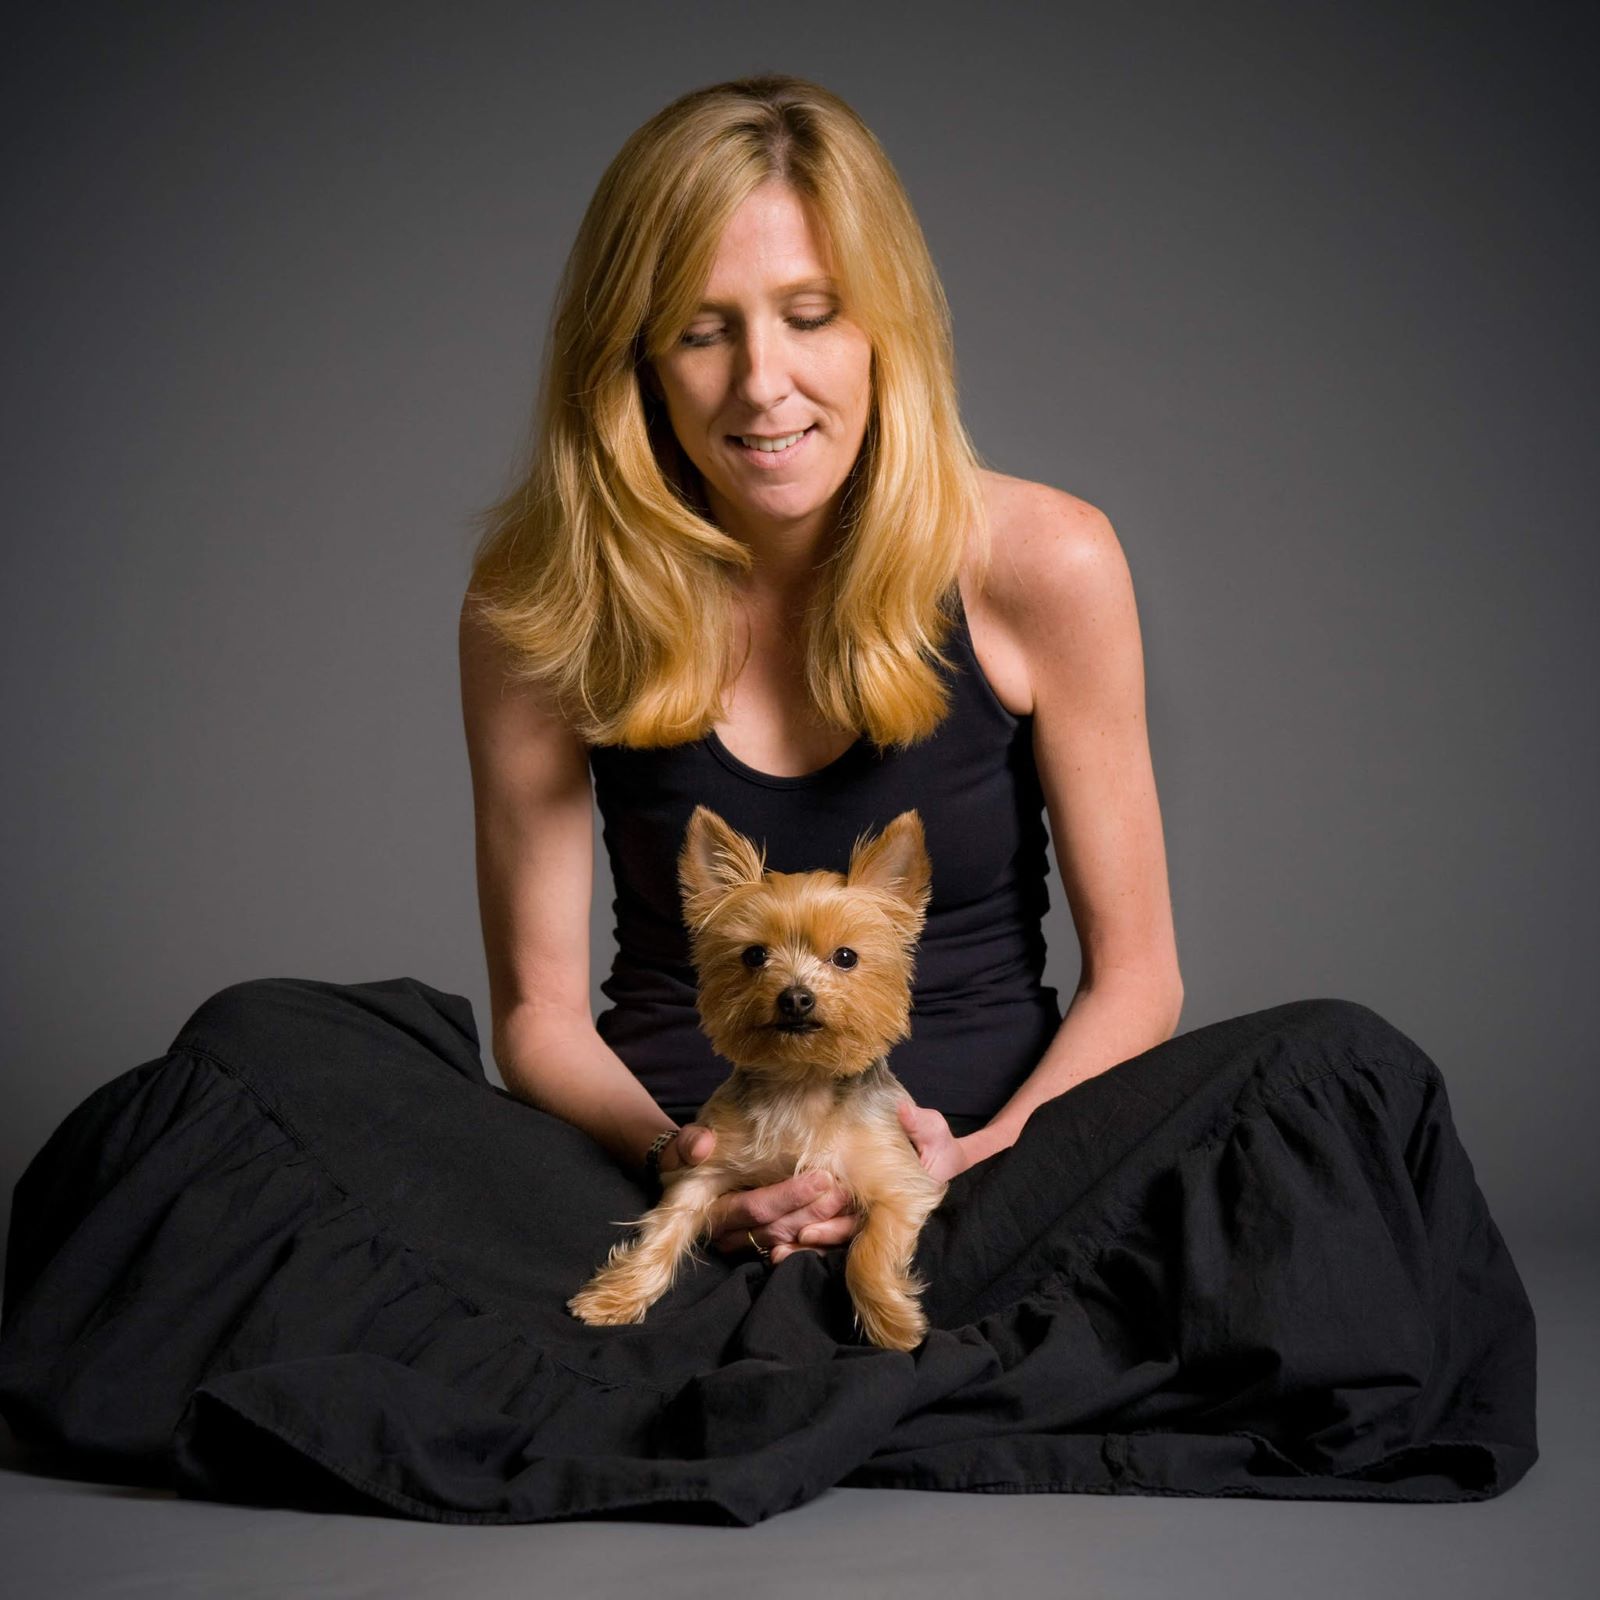 Maura Mandt dressed in a black dress with a small dog on her lap